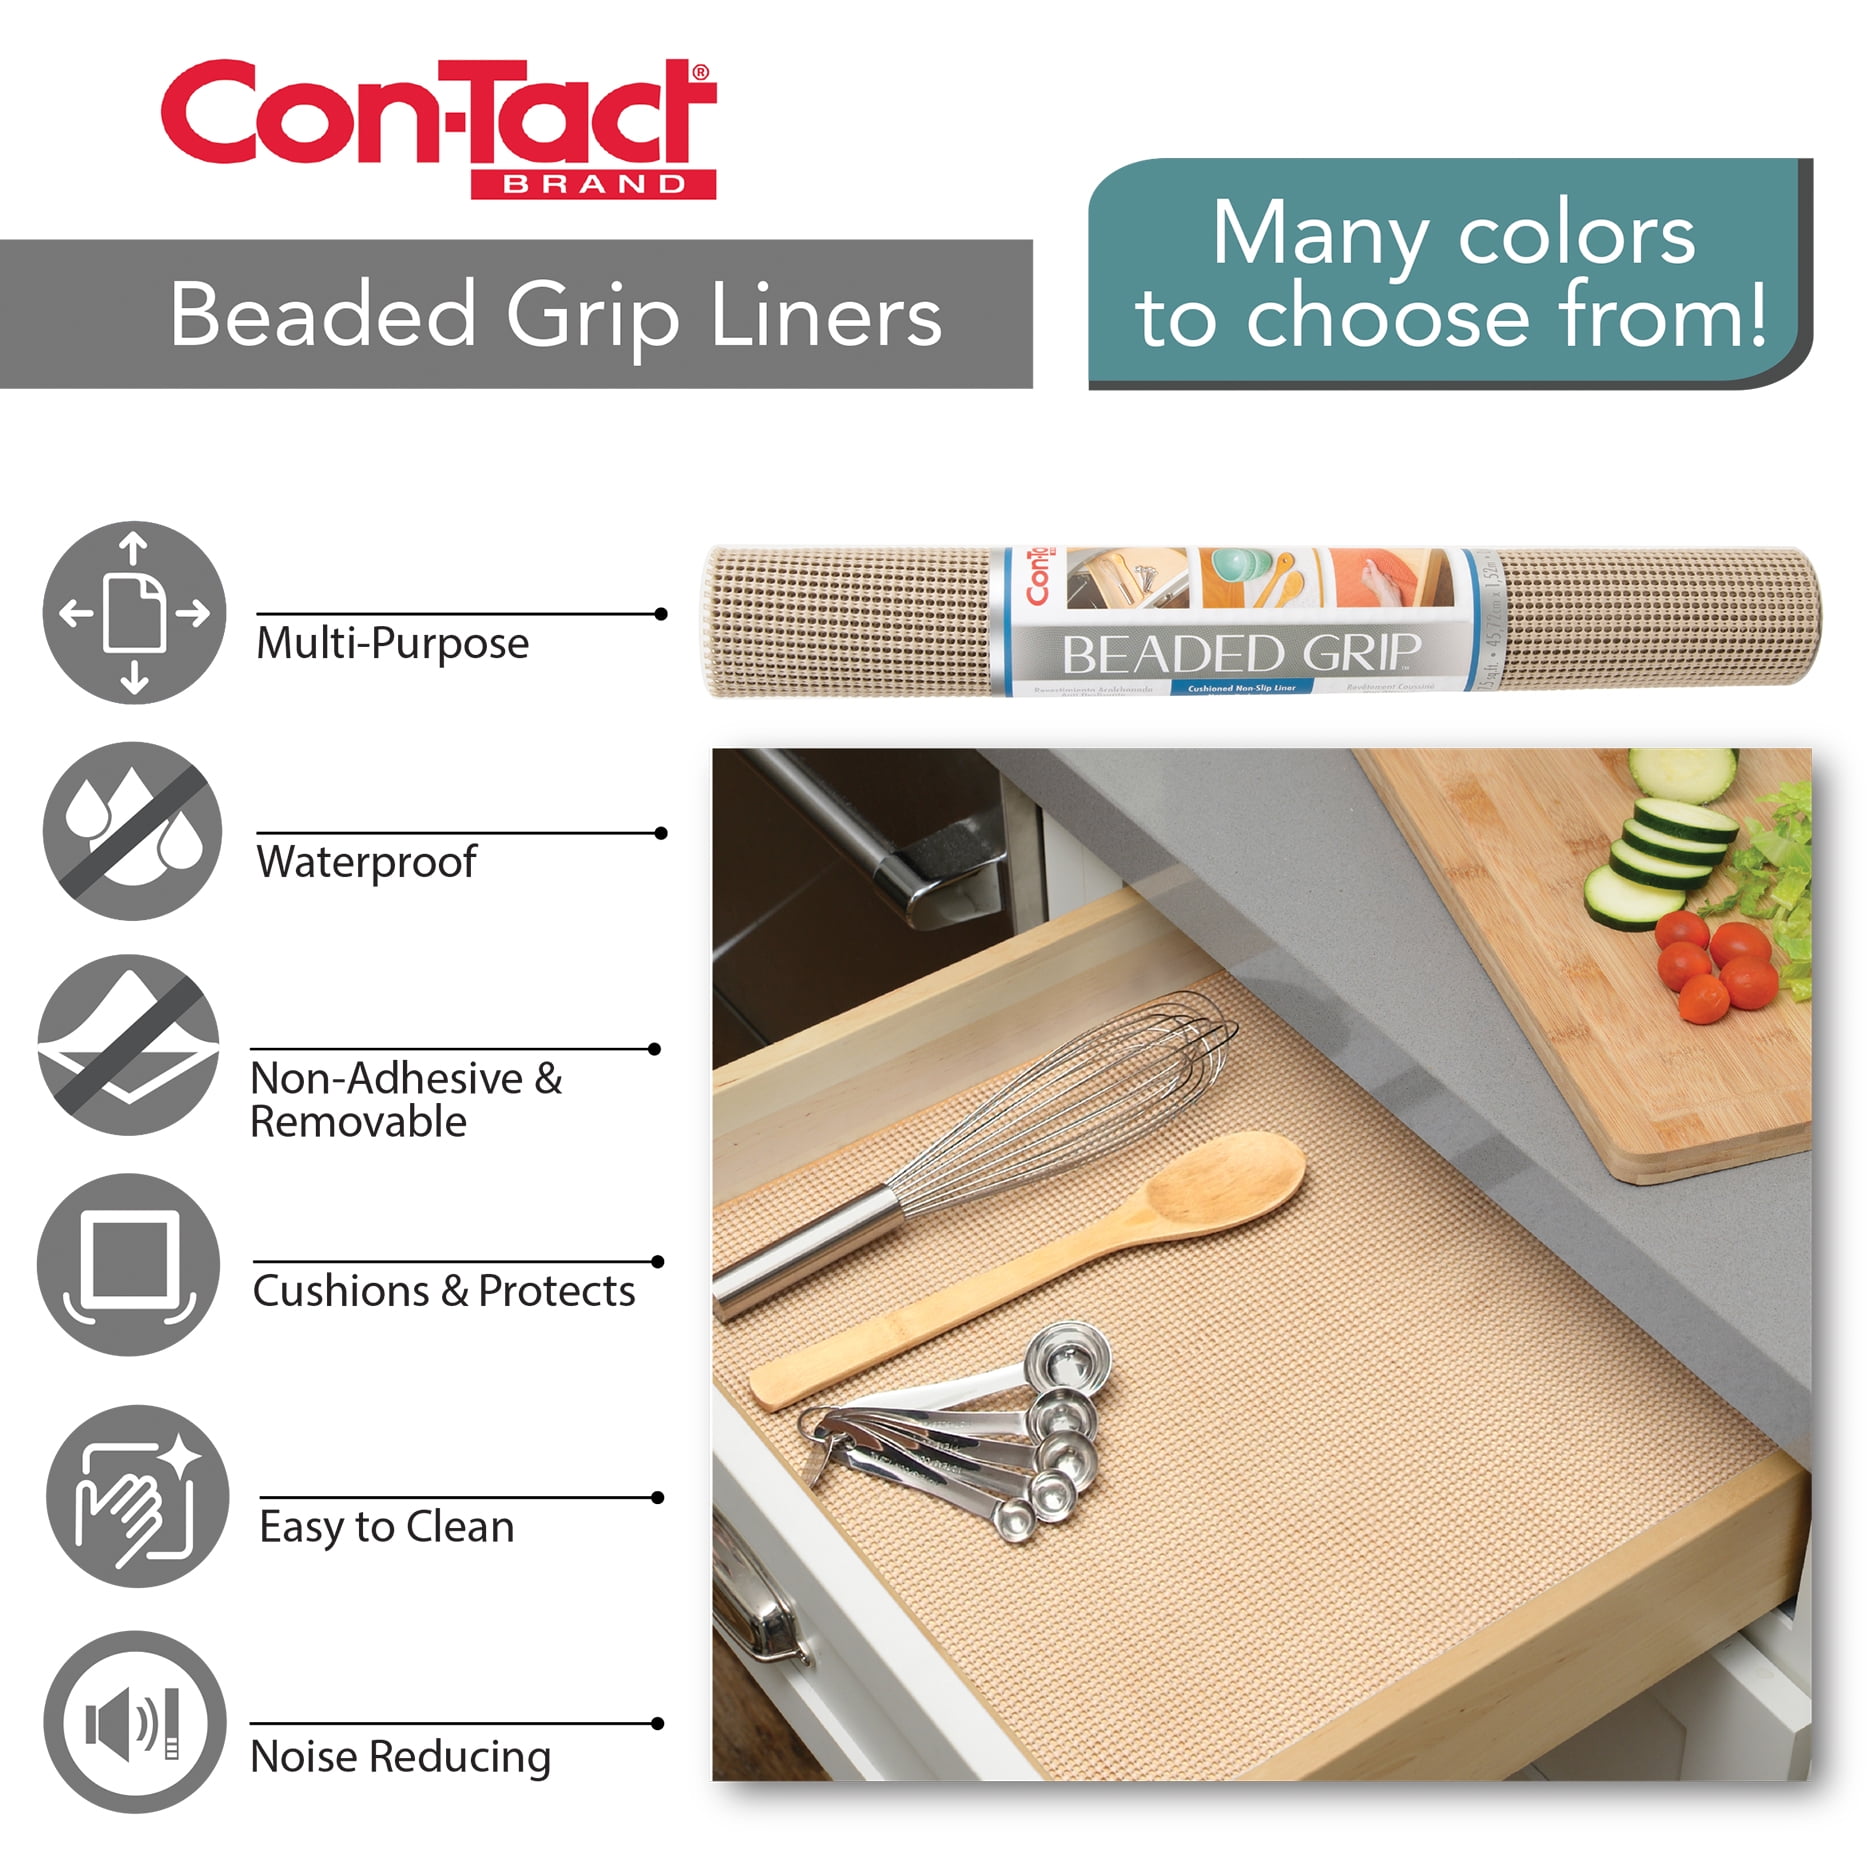 Con-Tact Brand Natural Weave Non-Adhesive Contact Shelf and Drawer Liner,  12 x 4', White Lattice Weave, (6 Rolls) - 12x4 - On Sale - Bed Bath &  Beyond - 35450746